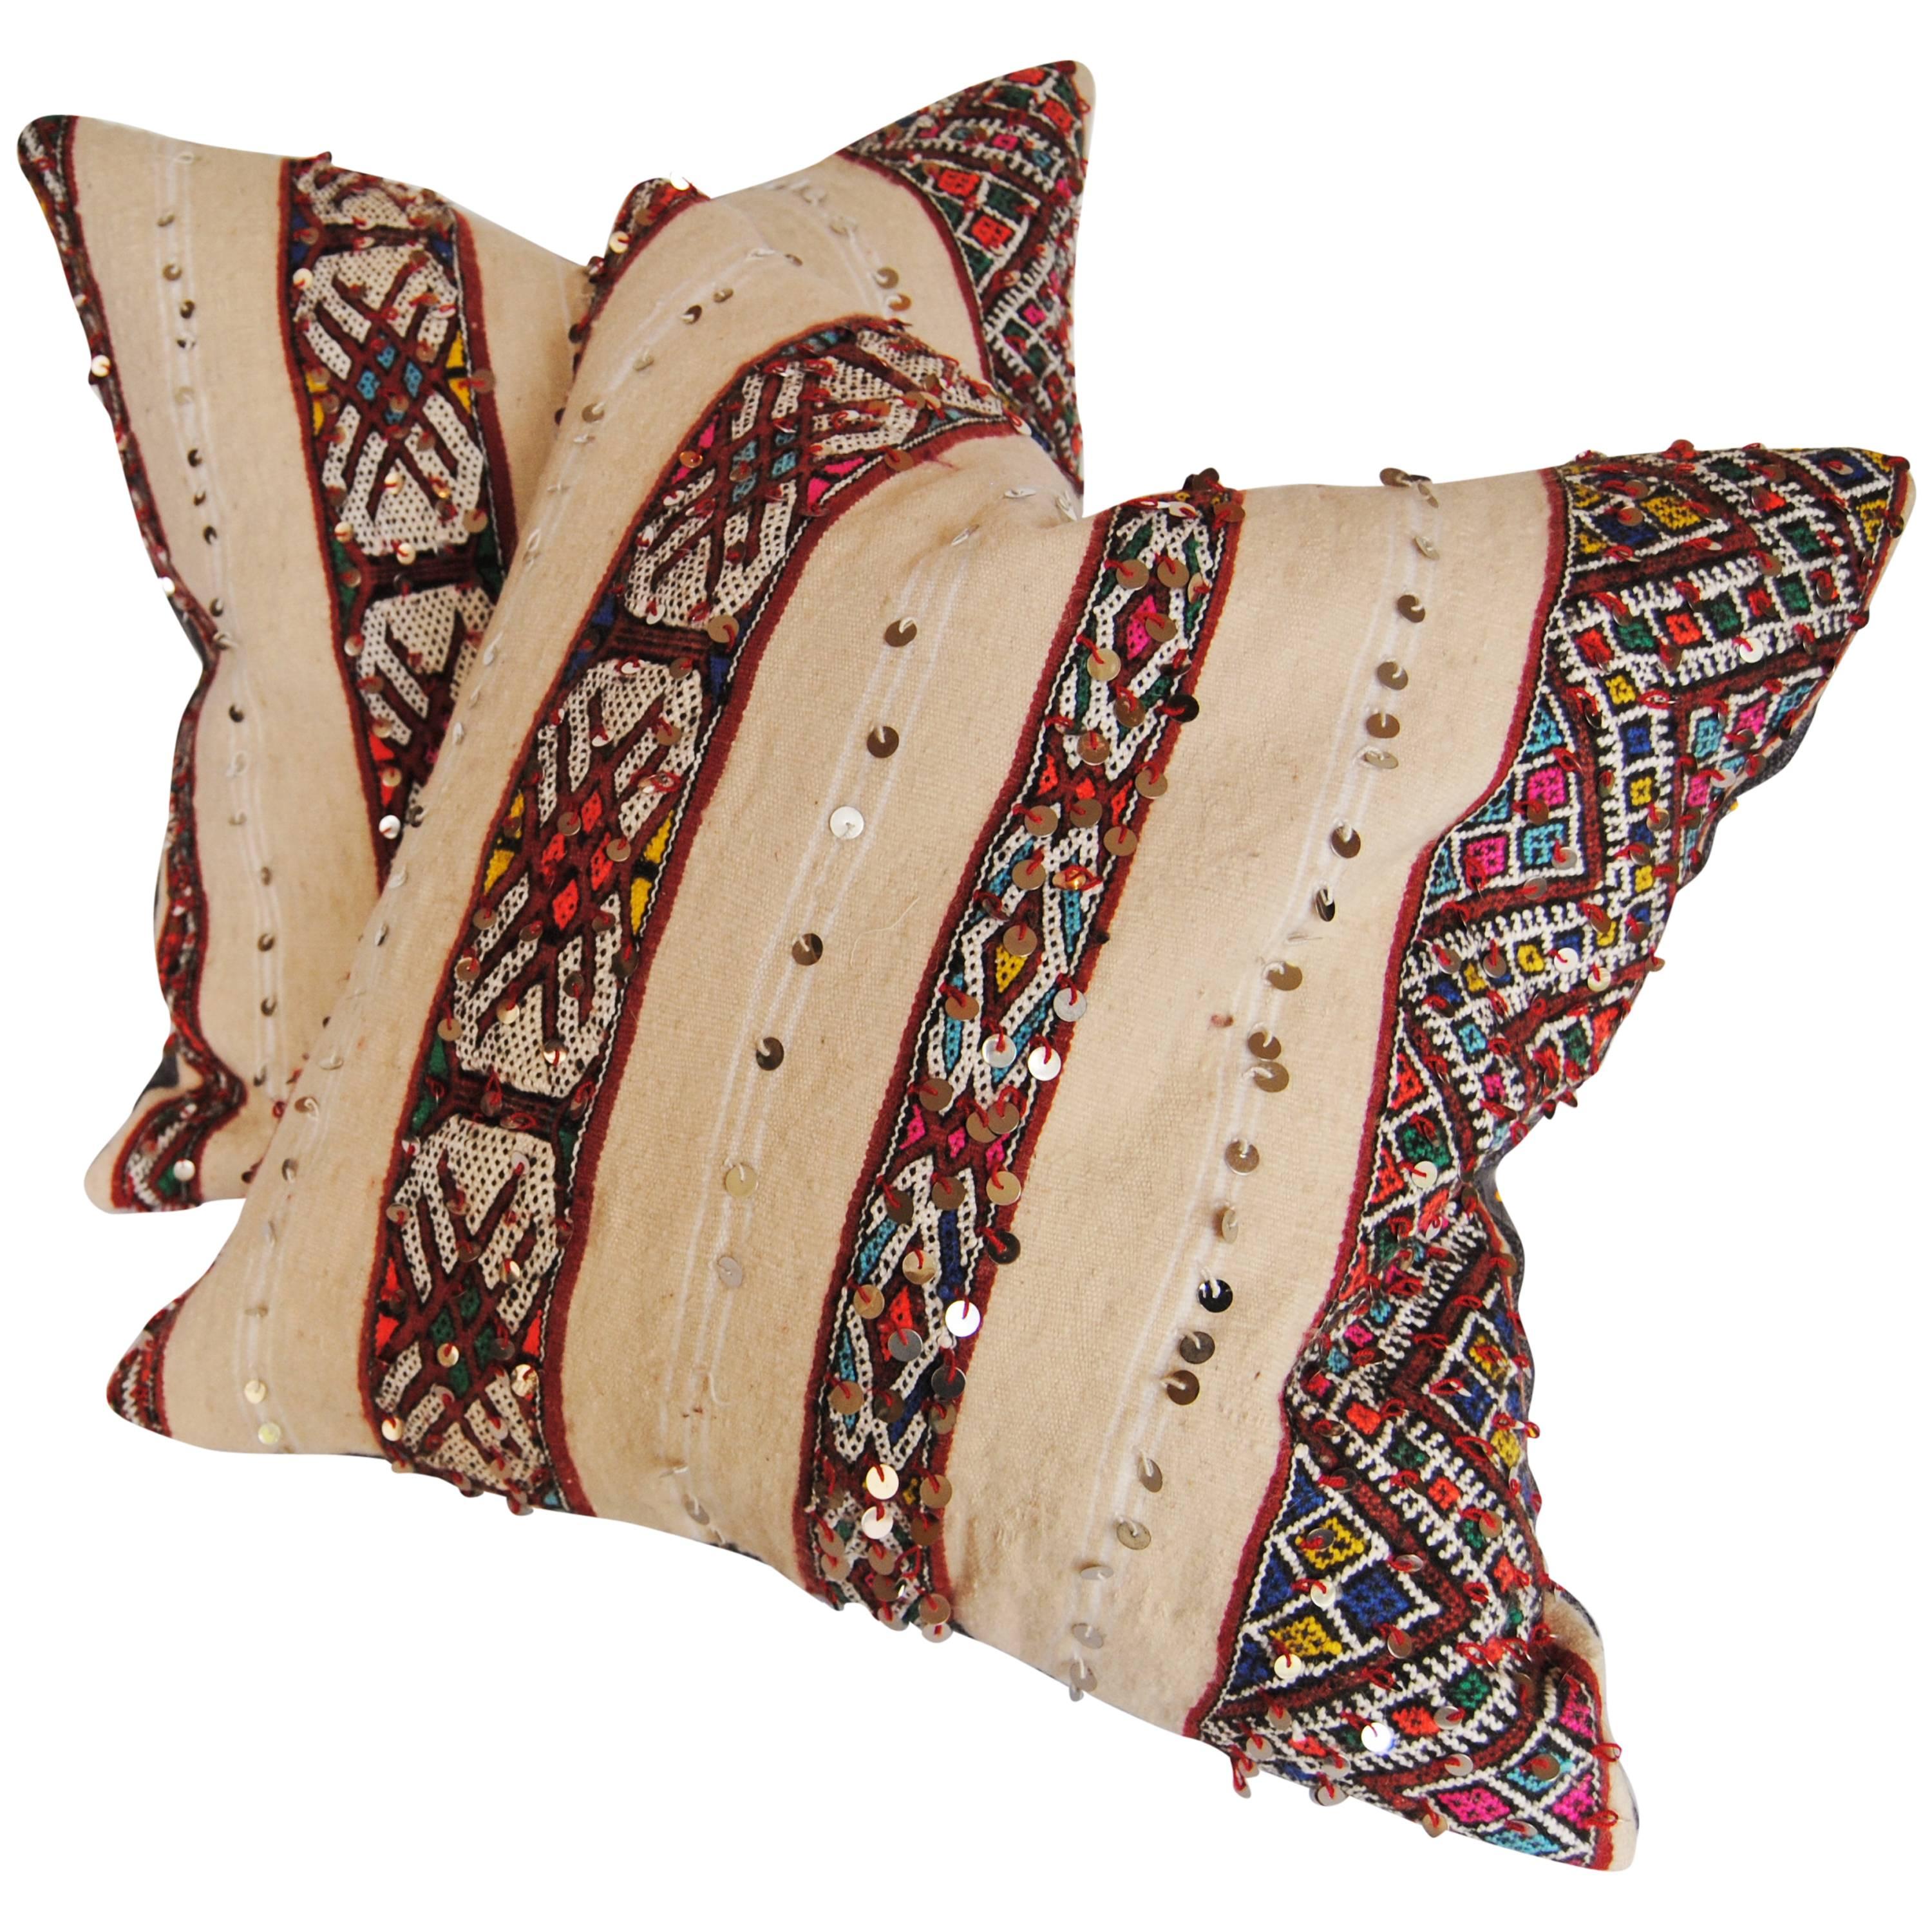 CustomPair of Moroccan Pillows Cut from a Hand-Loomed Wool Rug,  Atlas Mountains